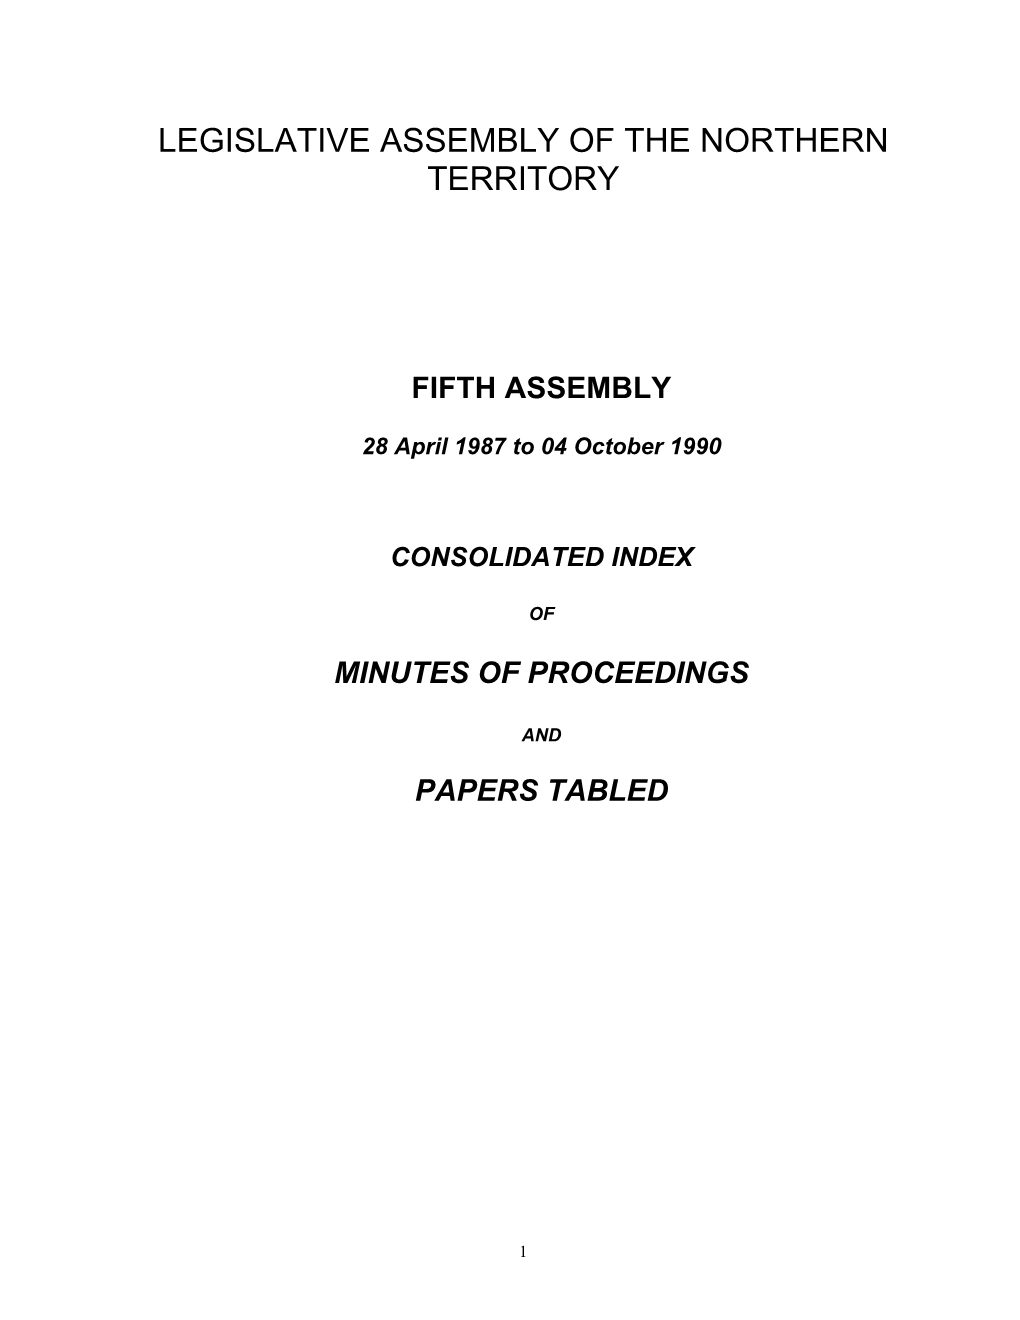 Fifth Legislative Assembly - Index to Minutes of Proceedings and Papers Tabled 28 April 1987 to 4 October 1990